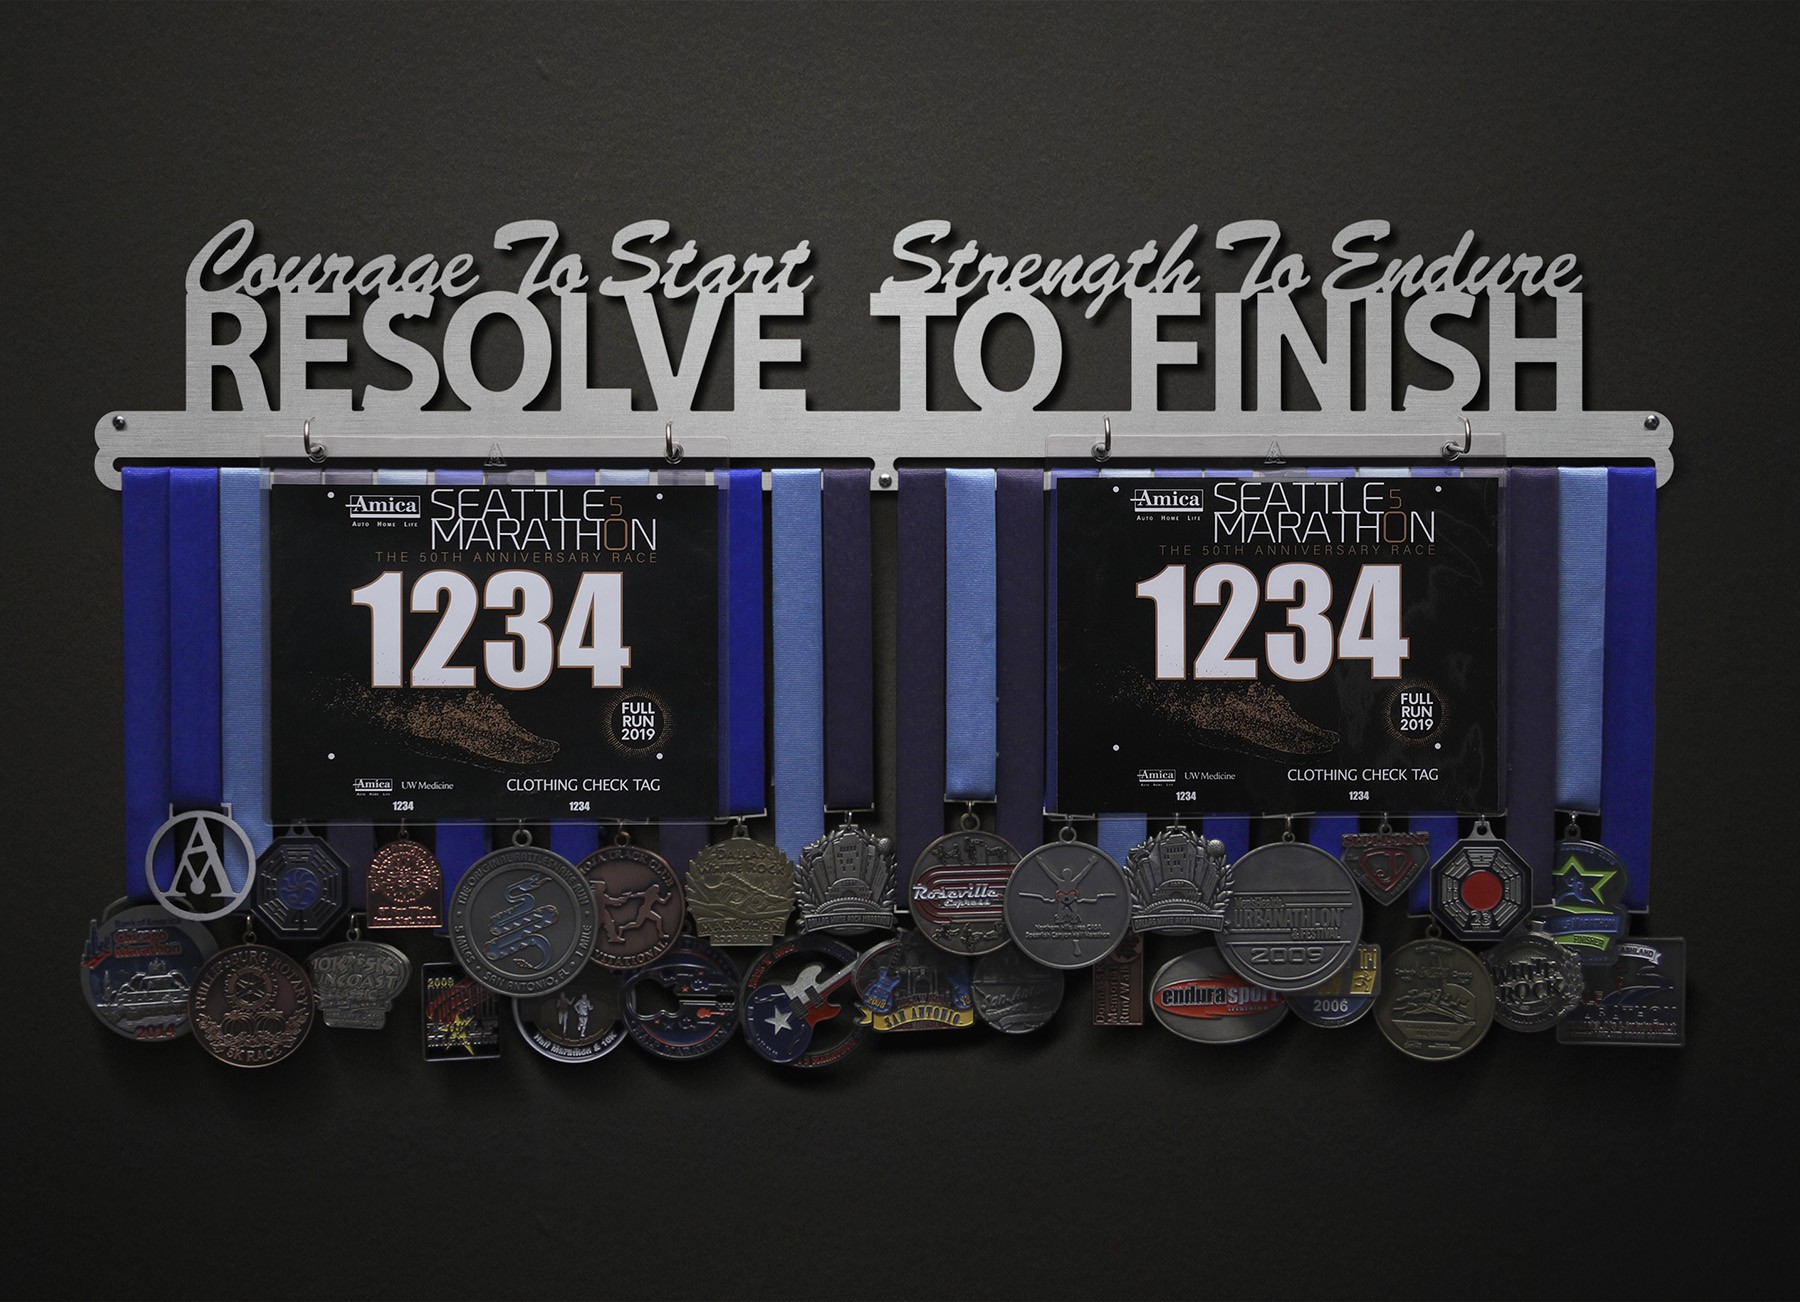 Courage To Start, Strength To Endure, Resolve To Finish Bib and Medal Display